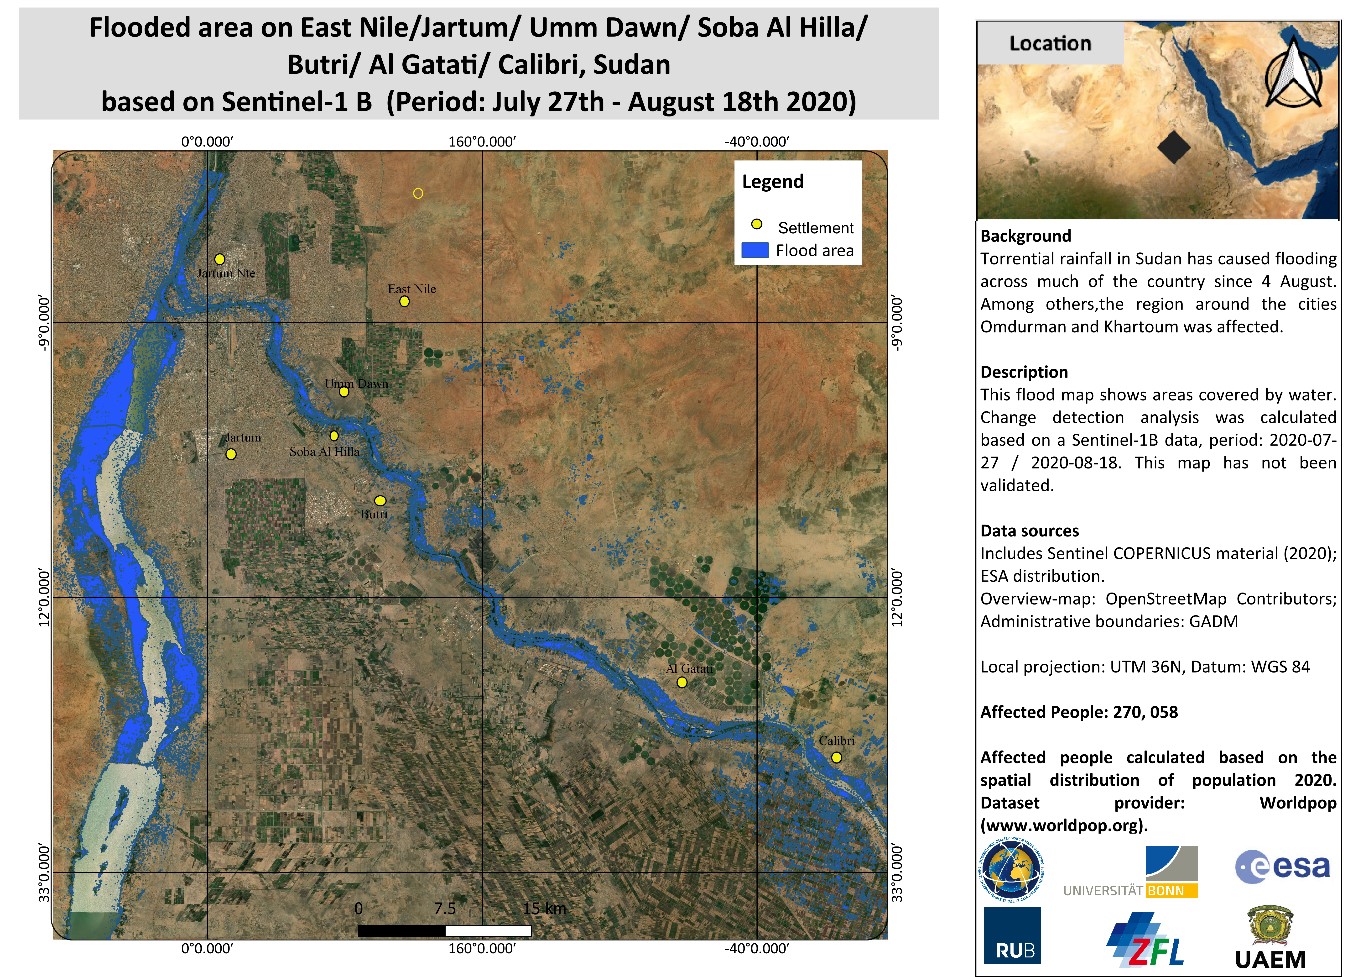 Figure 3: Flooded Area in affected region with Sentinel-1B Images between 27 July and 18 August, 2020. Raw imagery provided by ESA via the International Charter. Map produced by RUB, ZFL and UAEM. Available at: https://disasterscharter.org/image/journal/article.jpg?img_id=7032887&t=1598600800100.